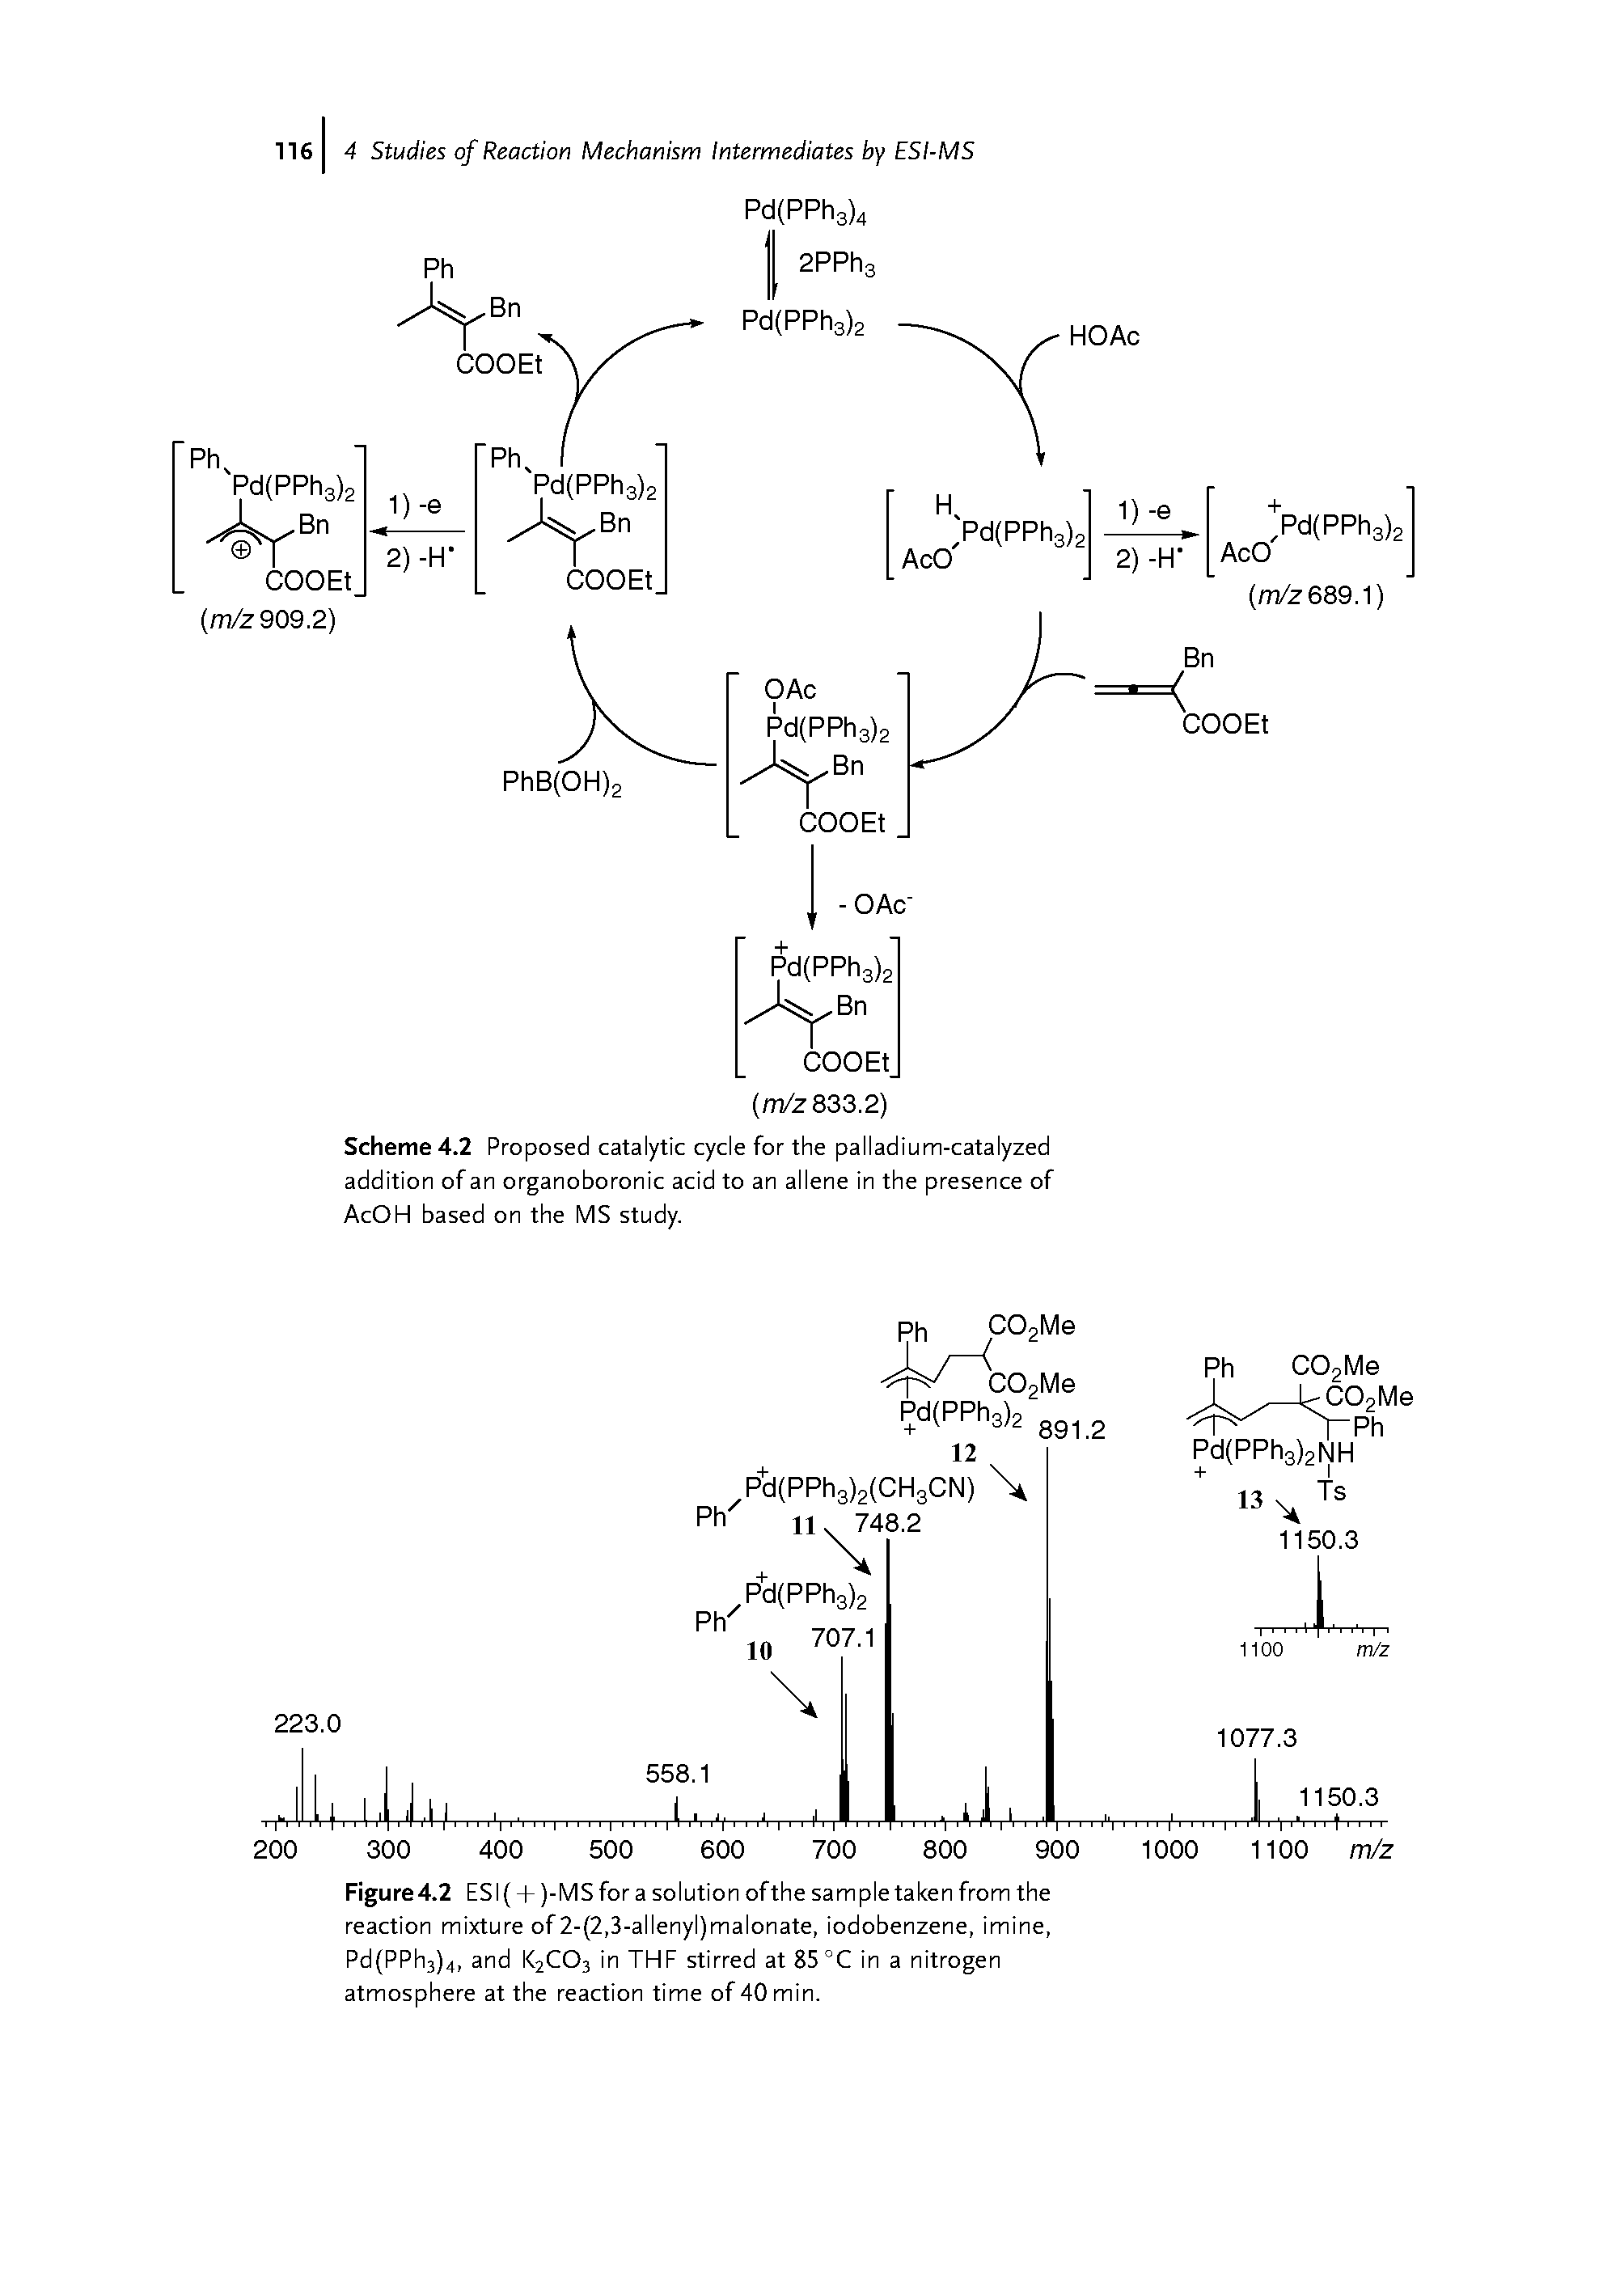 Figure4.2 ESI( + )-MS for a solution ofthe sample taken from the reaction mixture of 2-(2,3-allenyl)malonate, iodobenzene, imine, Pd(PPh3)4, and K2CO3 in THF stirred at85°C in a nitrogen atmosphere at the reaction time of 40 min.